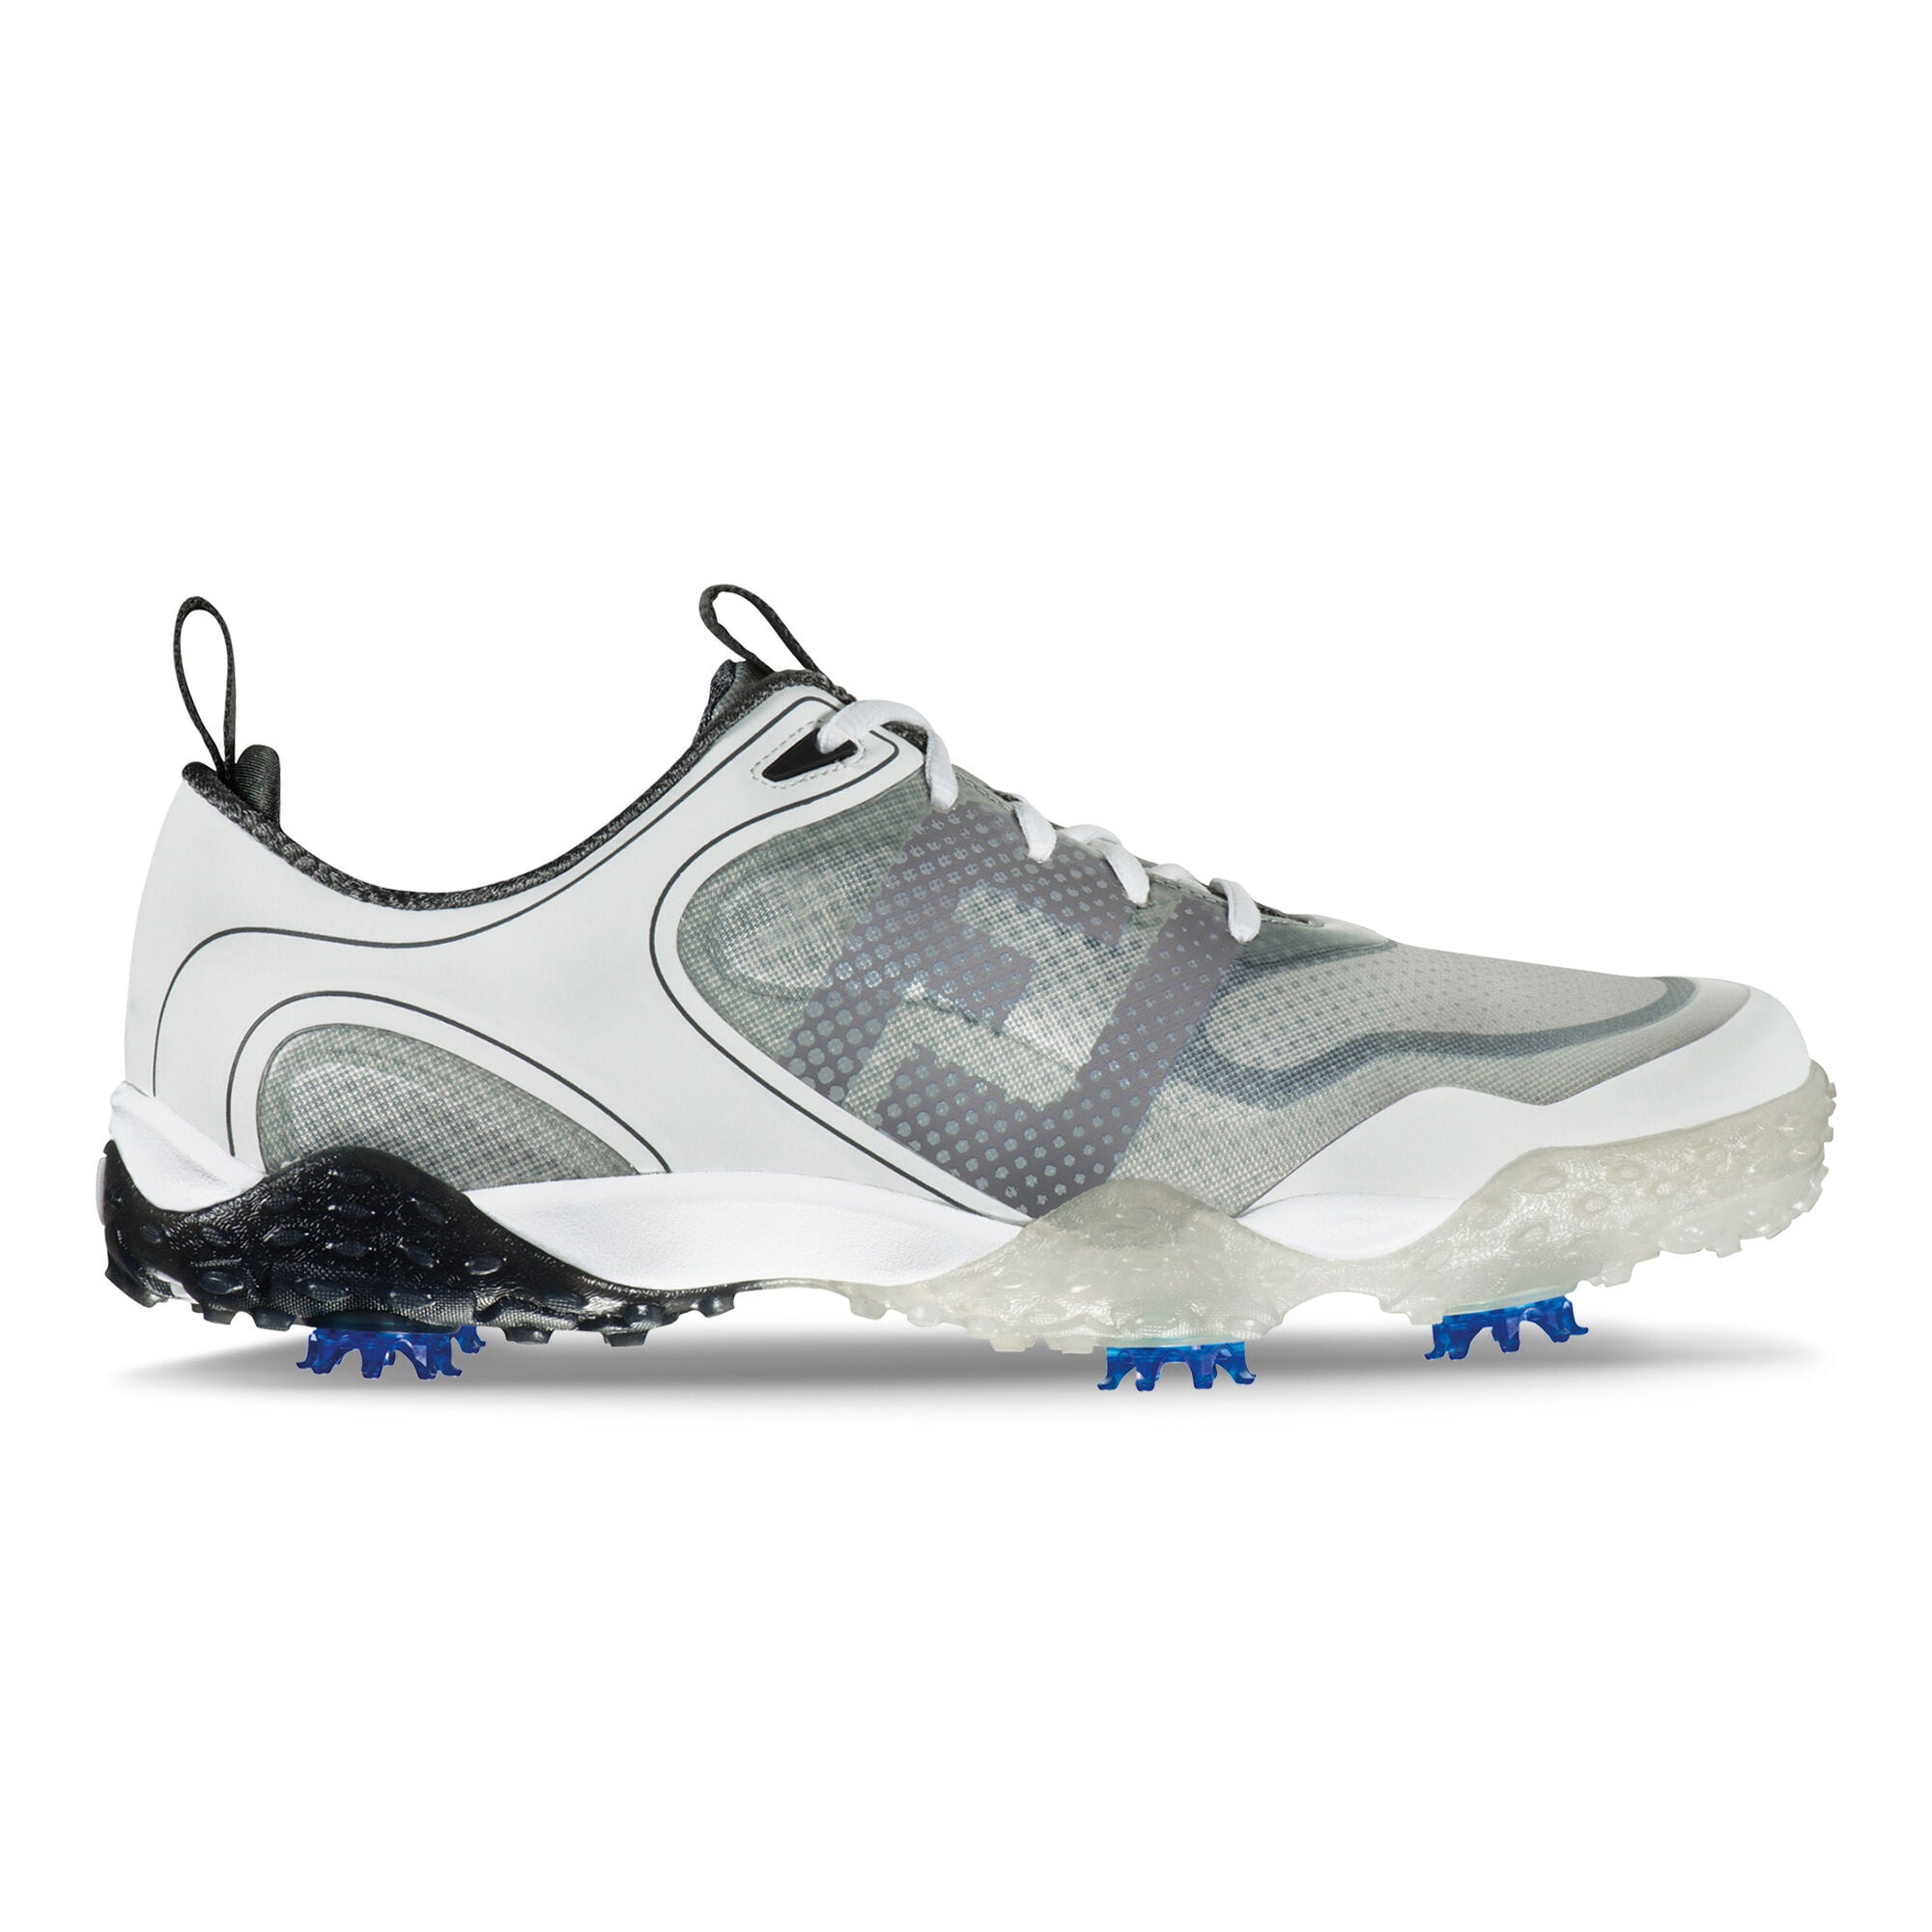 FreeStyle Golf Shoes - Mesh Golf Shoes 